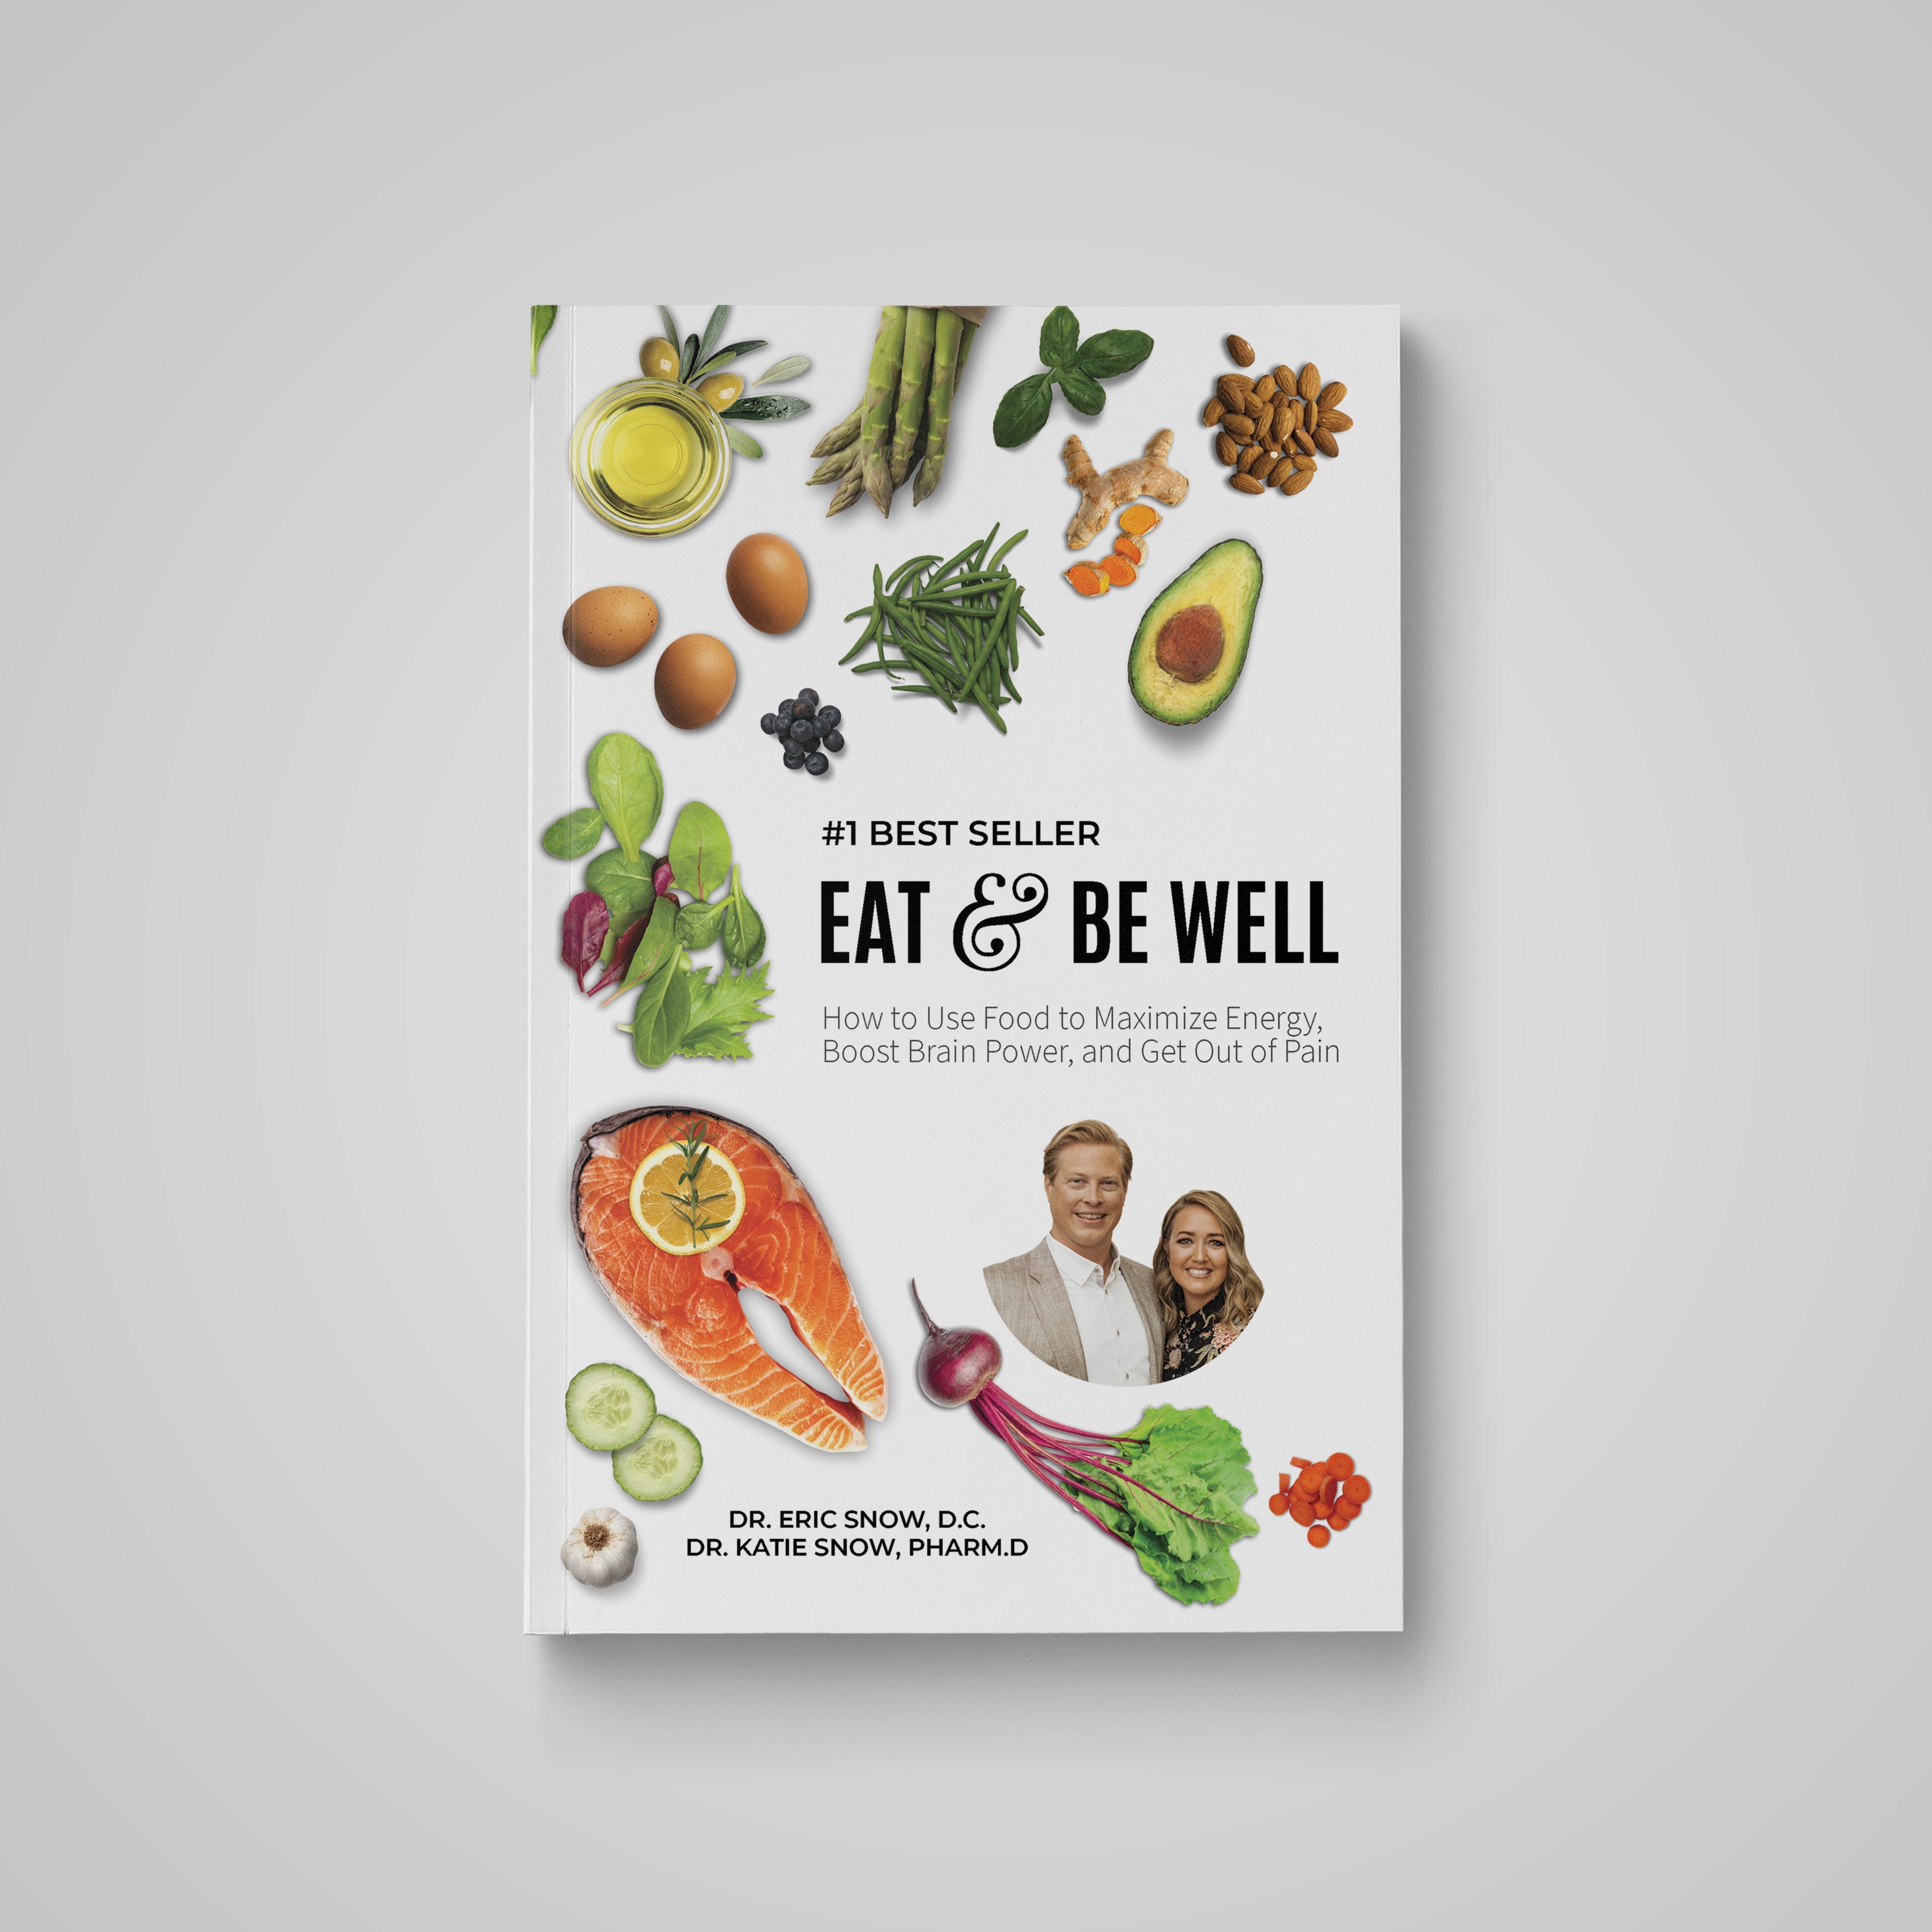 Eat & Be Well: How To Use Food To Maximize Energy, Boost Brain Power, And Get Out Of Pain